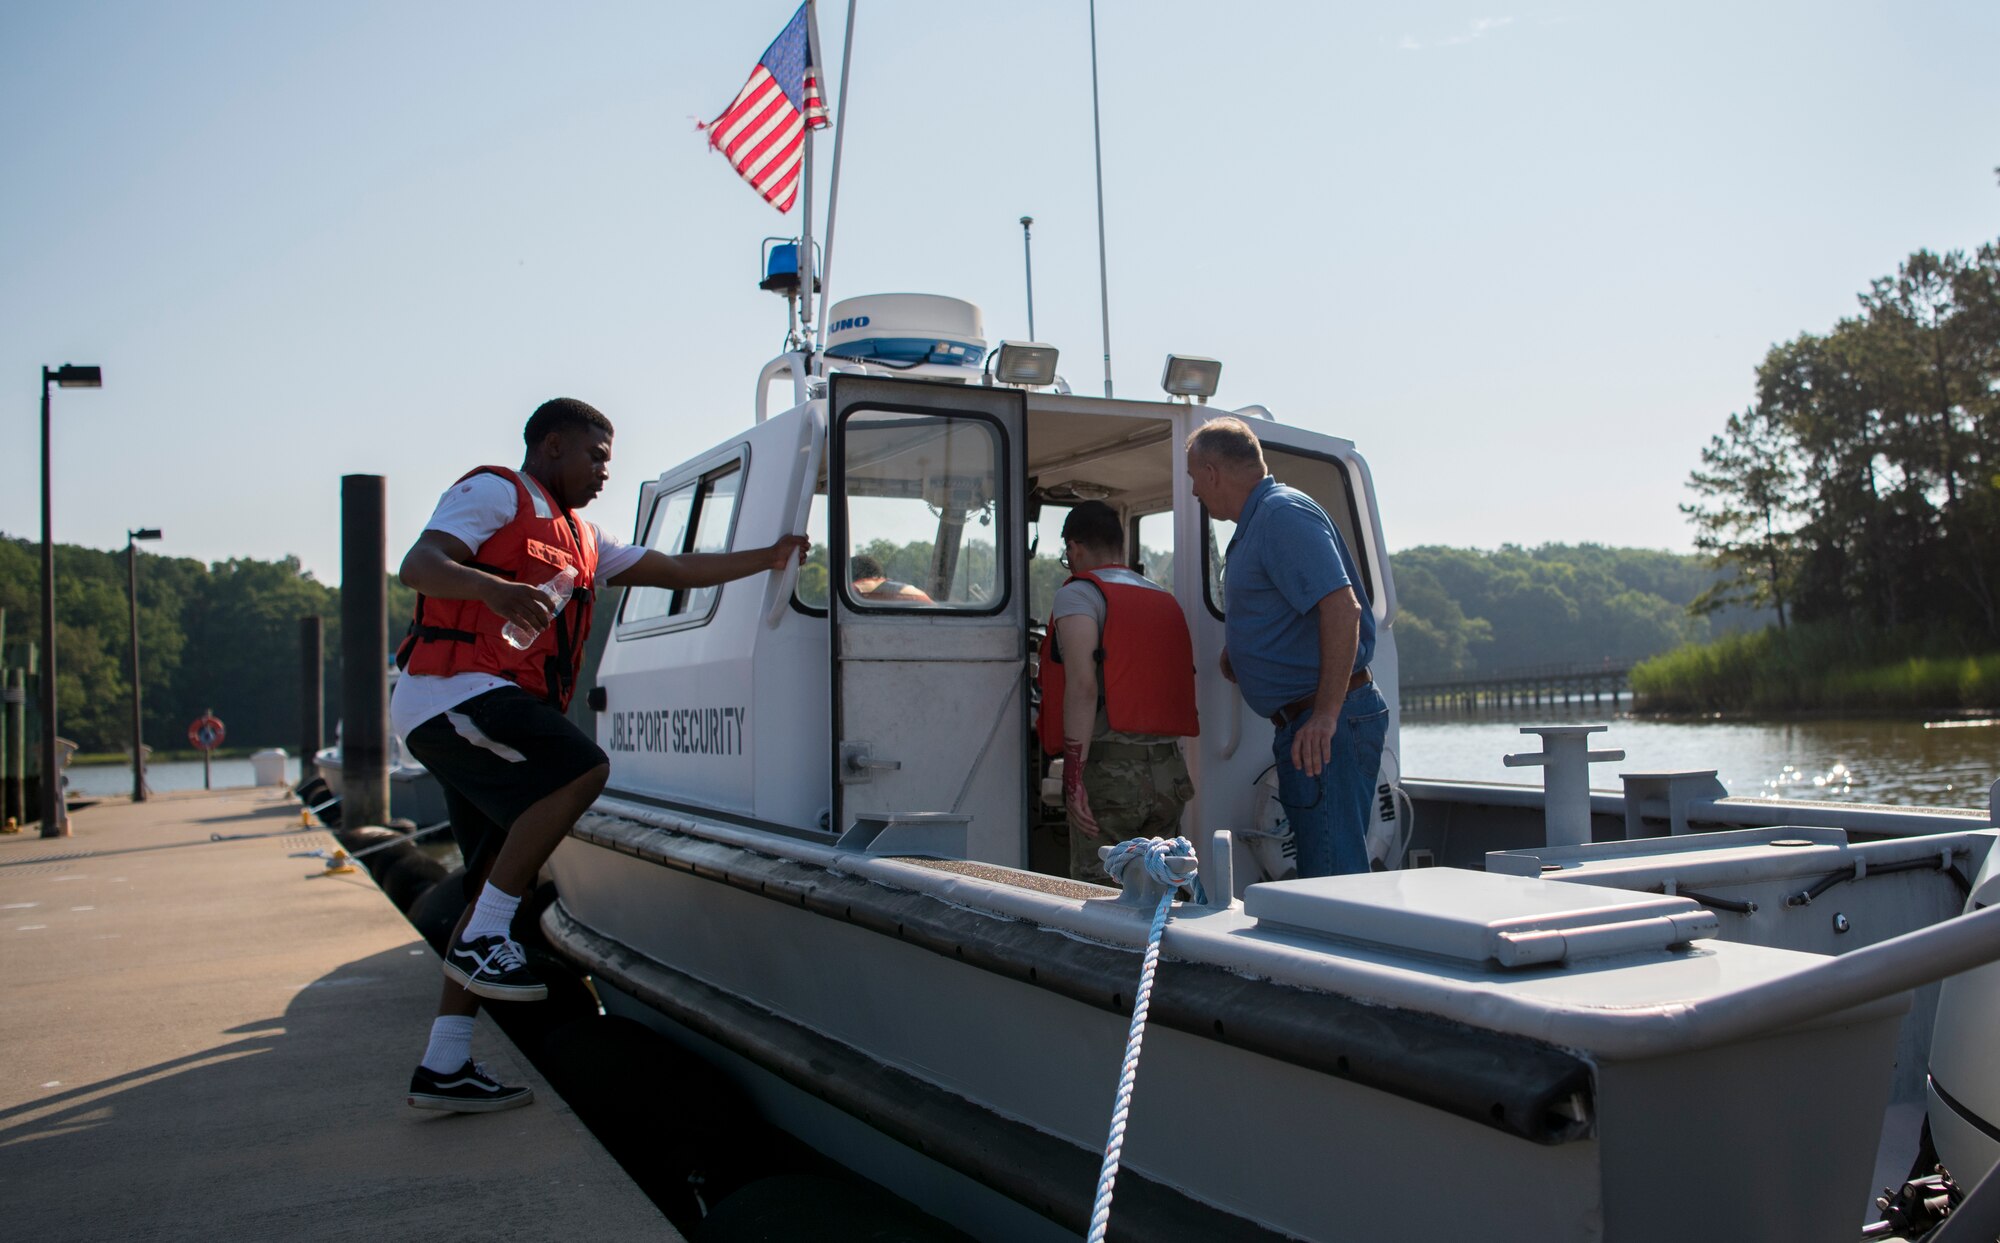 Volunteers board a boat prior to an aircraft crash exercise at Joint Base Langley-Eustis, Virginia, July 17, 2018.